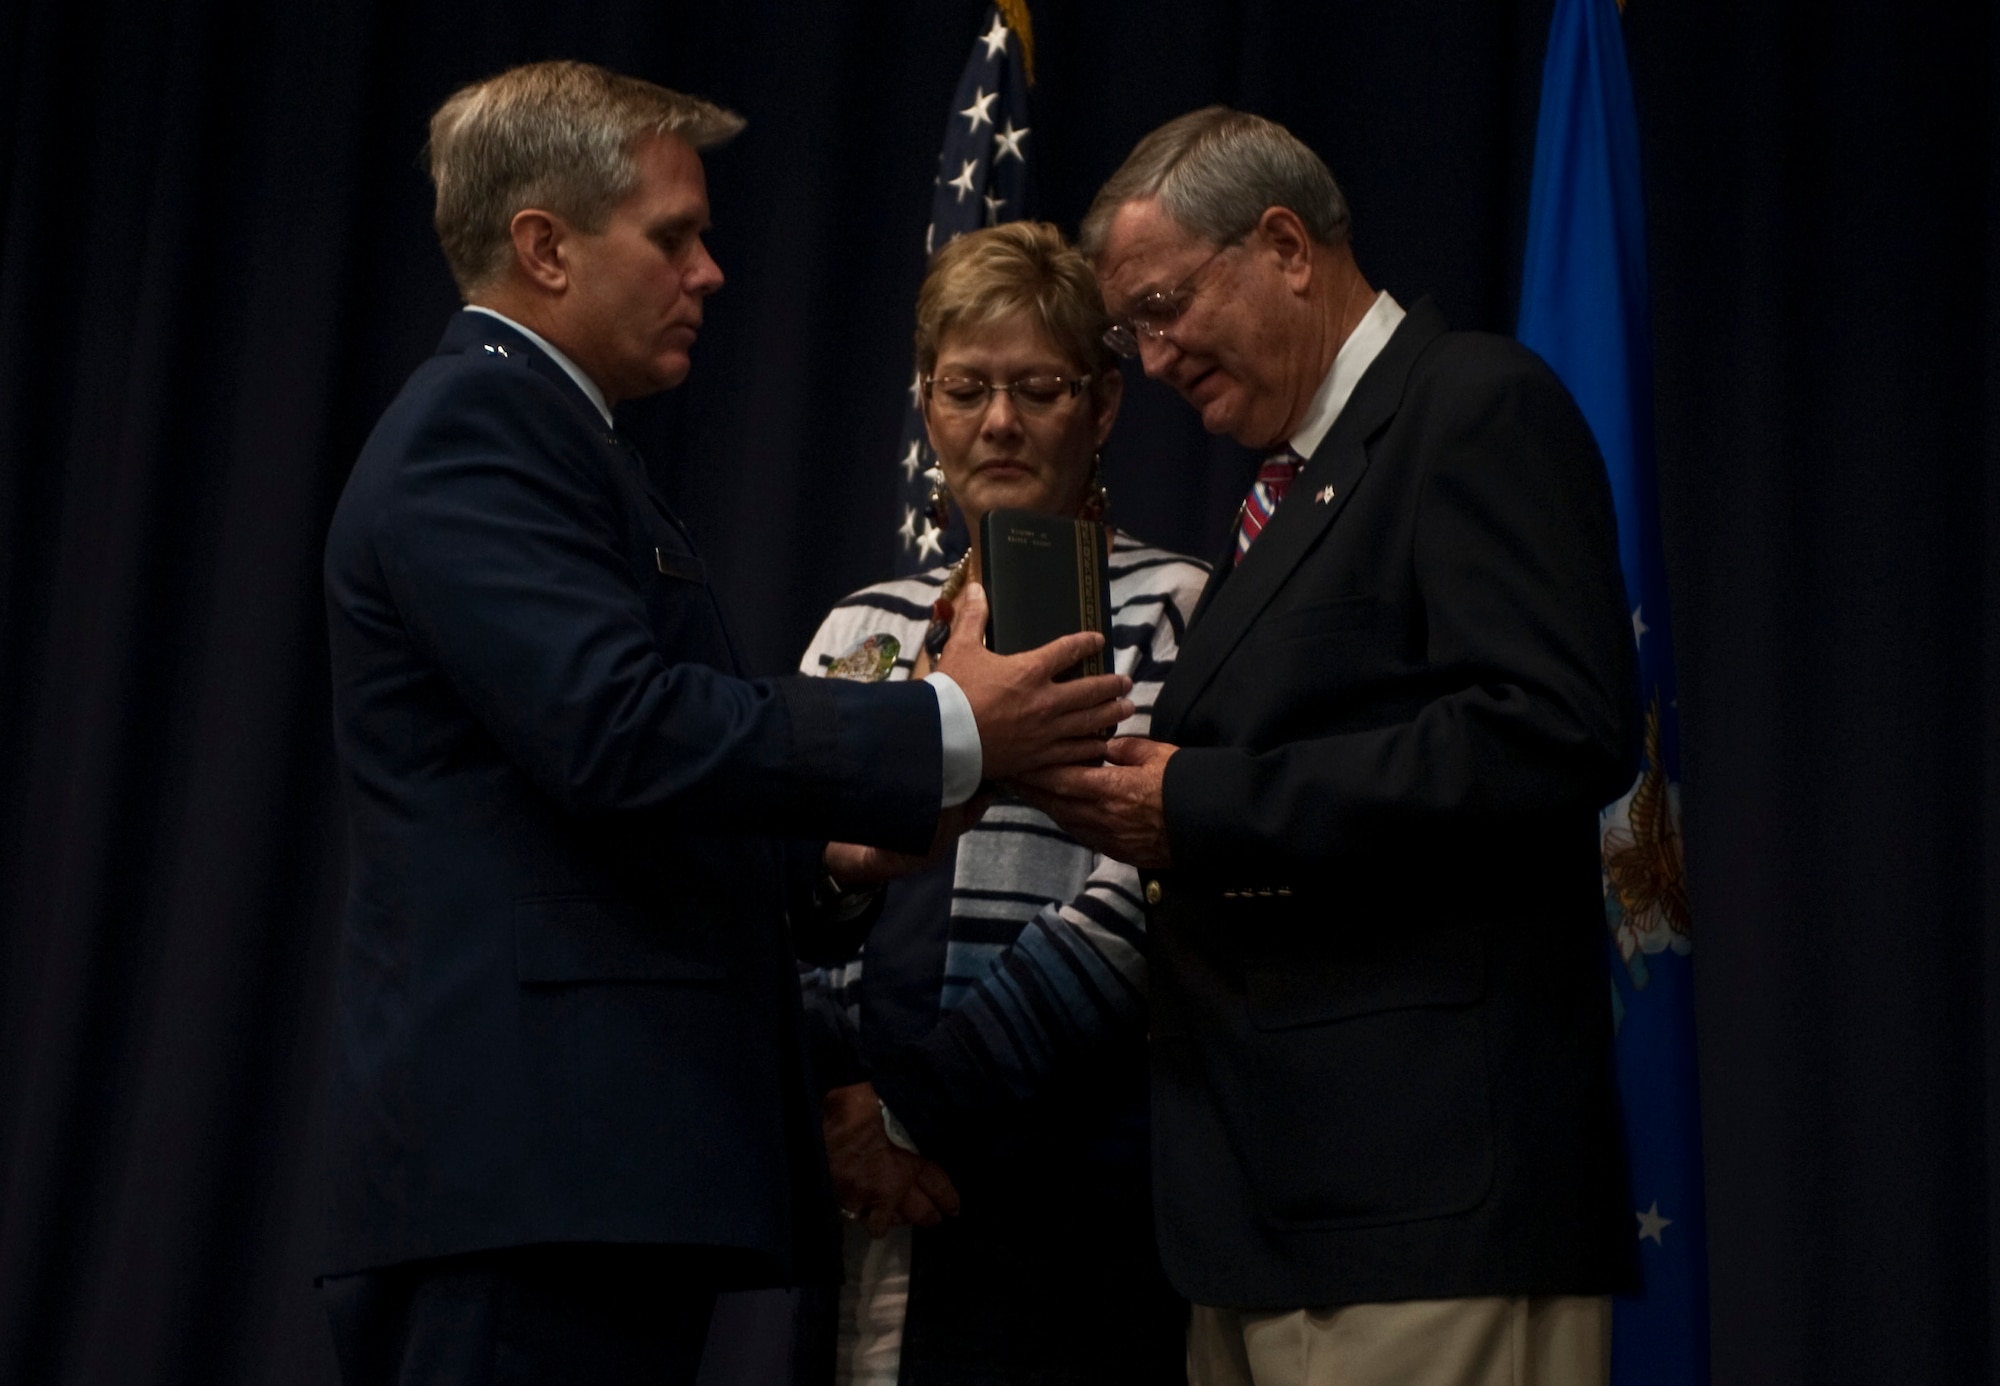 U.S. Air Force Lt. Gen. Eric E. Fiel, commander of Air Force Special Operations Command, presents a Silver Star Medal to Ray and Pat Forester at the King Auditorium, Hurlburt Field, Fla., Jun. 15, 2012. The award was presented on behalf of their son, Senior Airman Mark Forester, who died in combat in Afghanistan Sept. 29, 2010. (U.S. Air Force Photo/Airman 1st Class Hayden K. Hyatt)